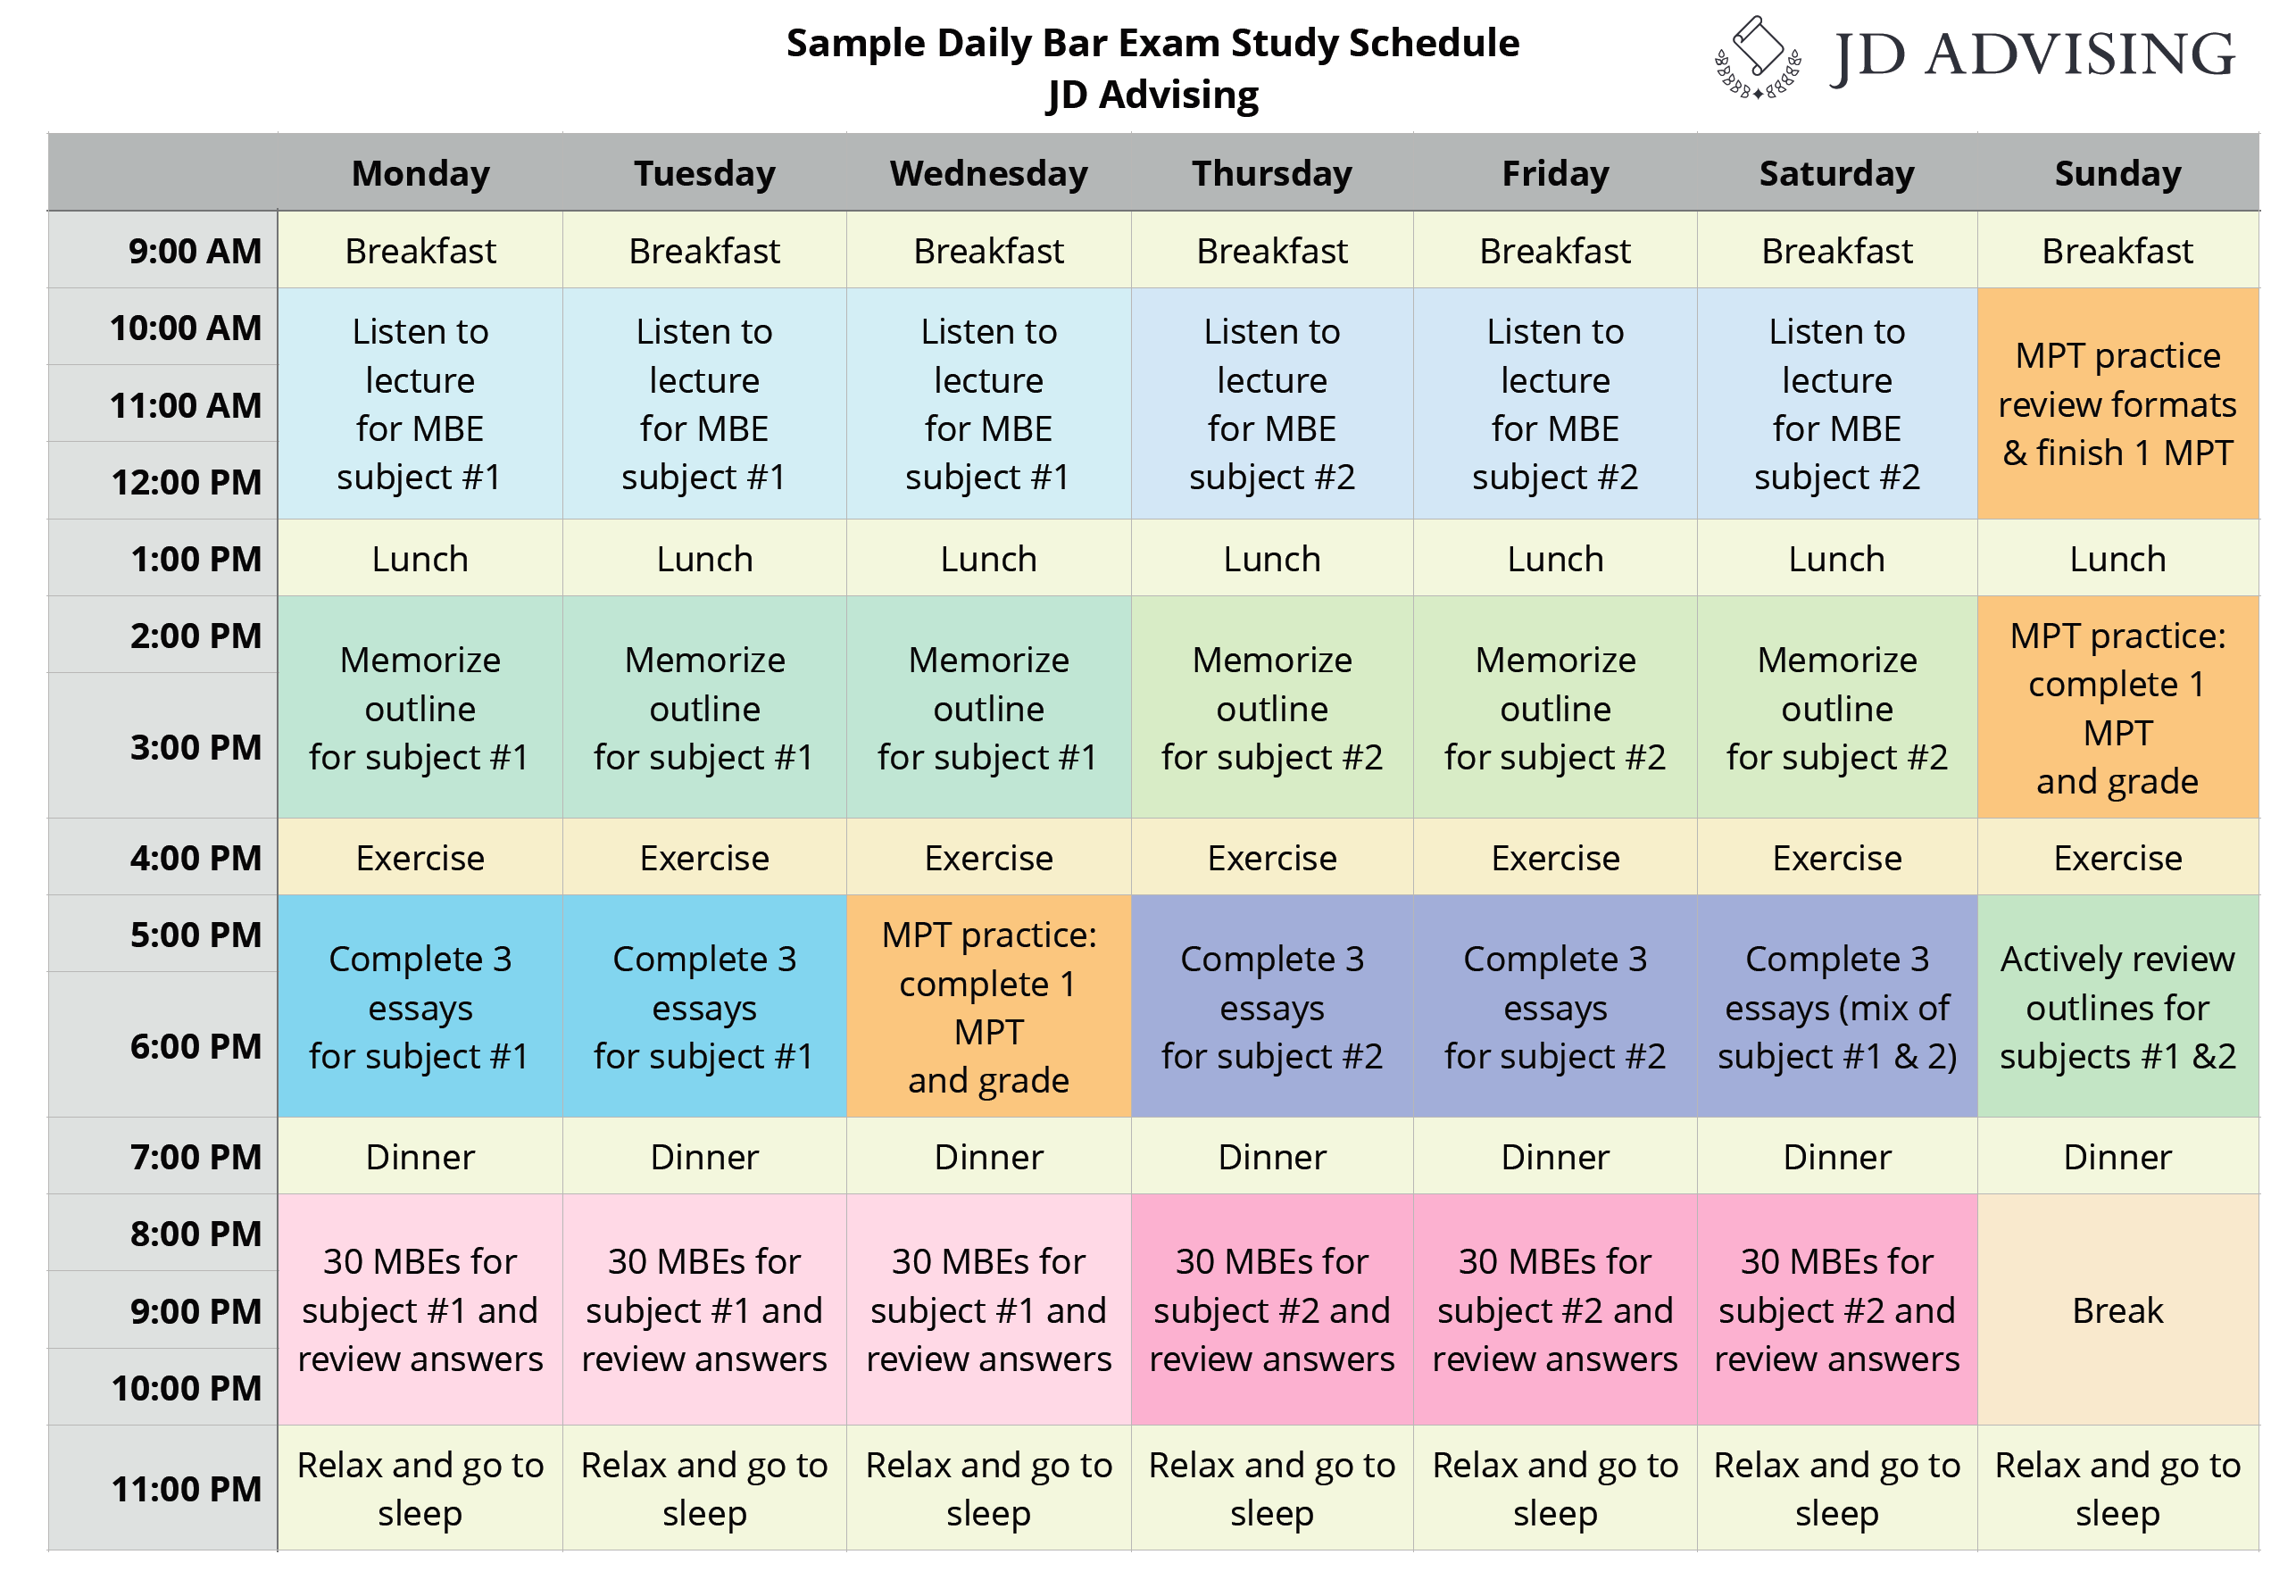 Sample Daily Bar Exam Study Schedule